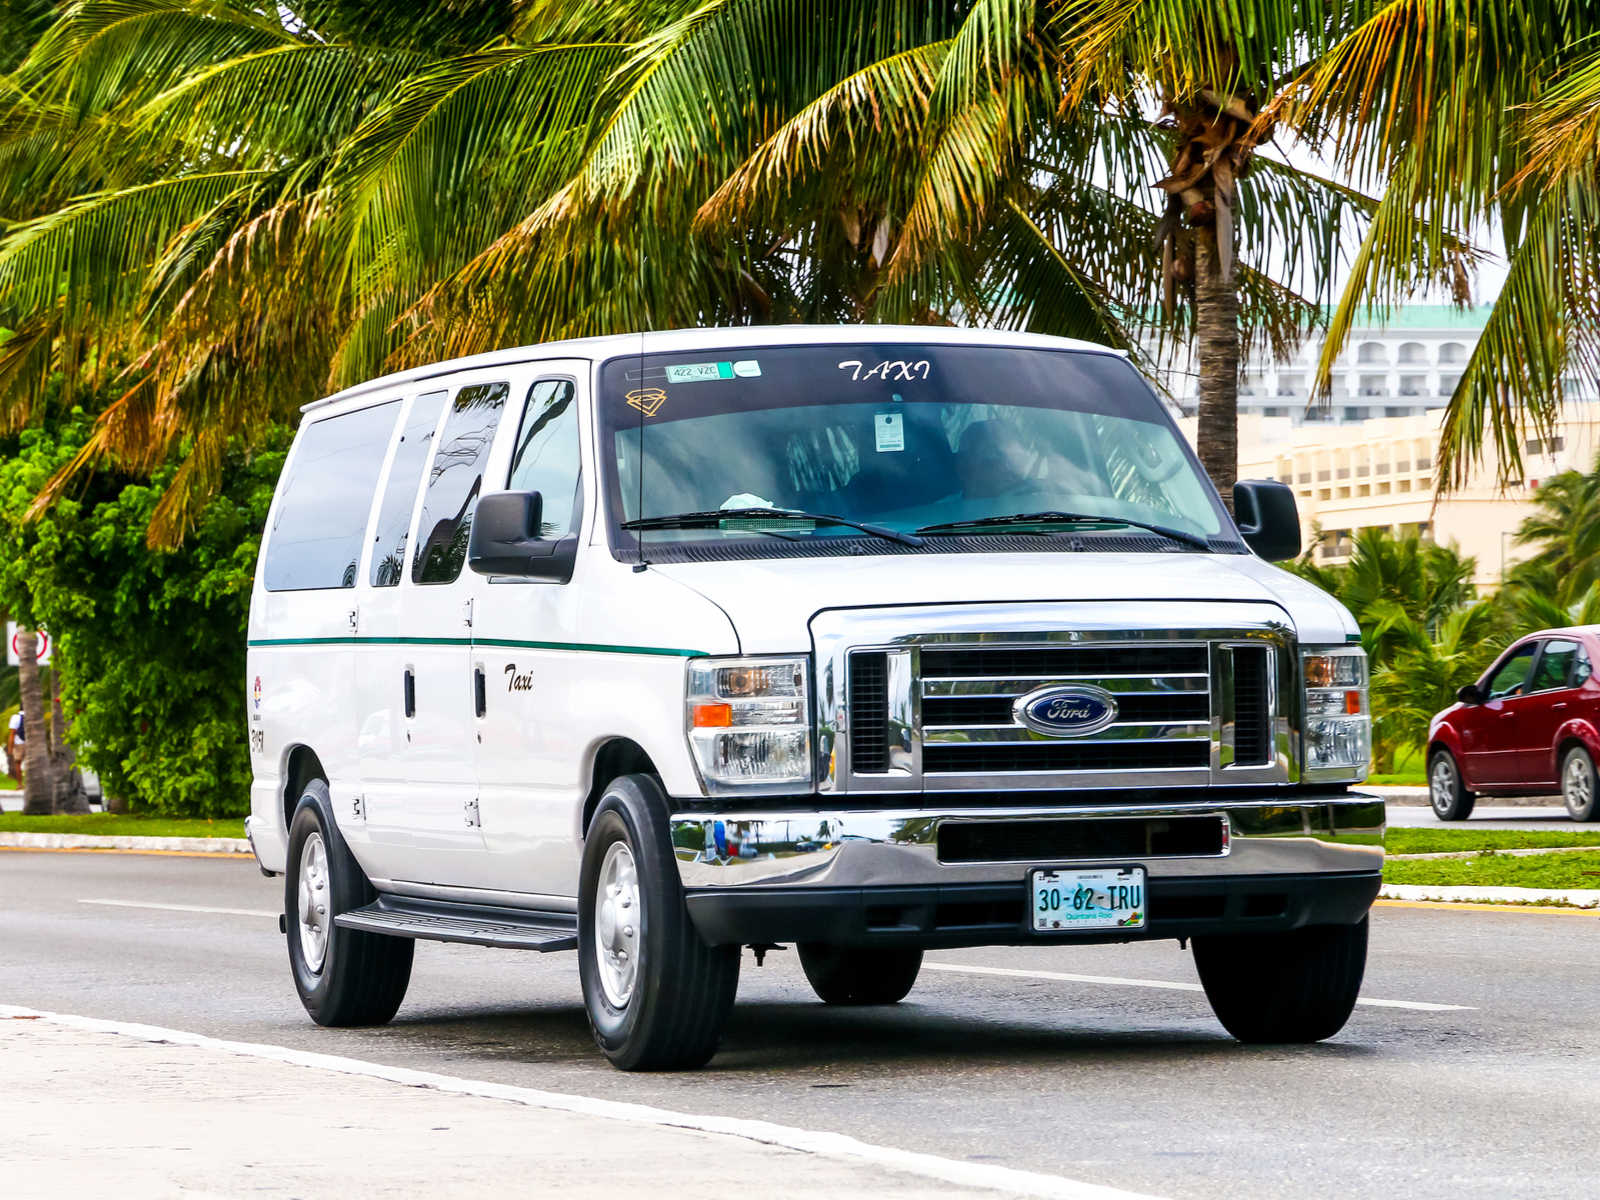 Photo of a white van taxi, one of the ways to get to the best clubs in Cancun